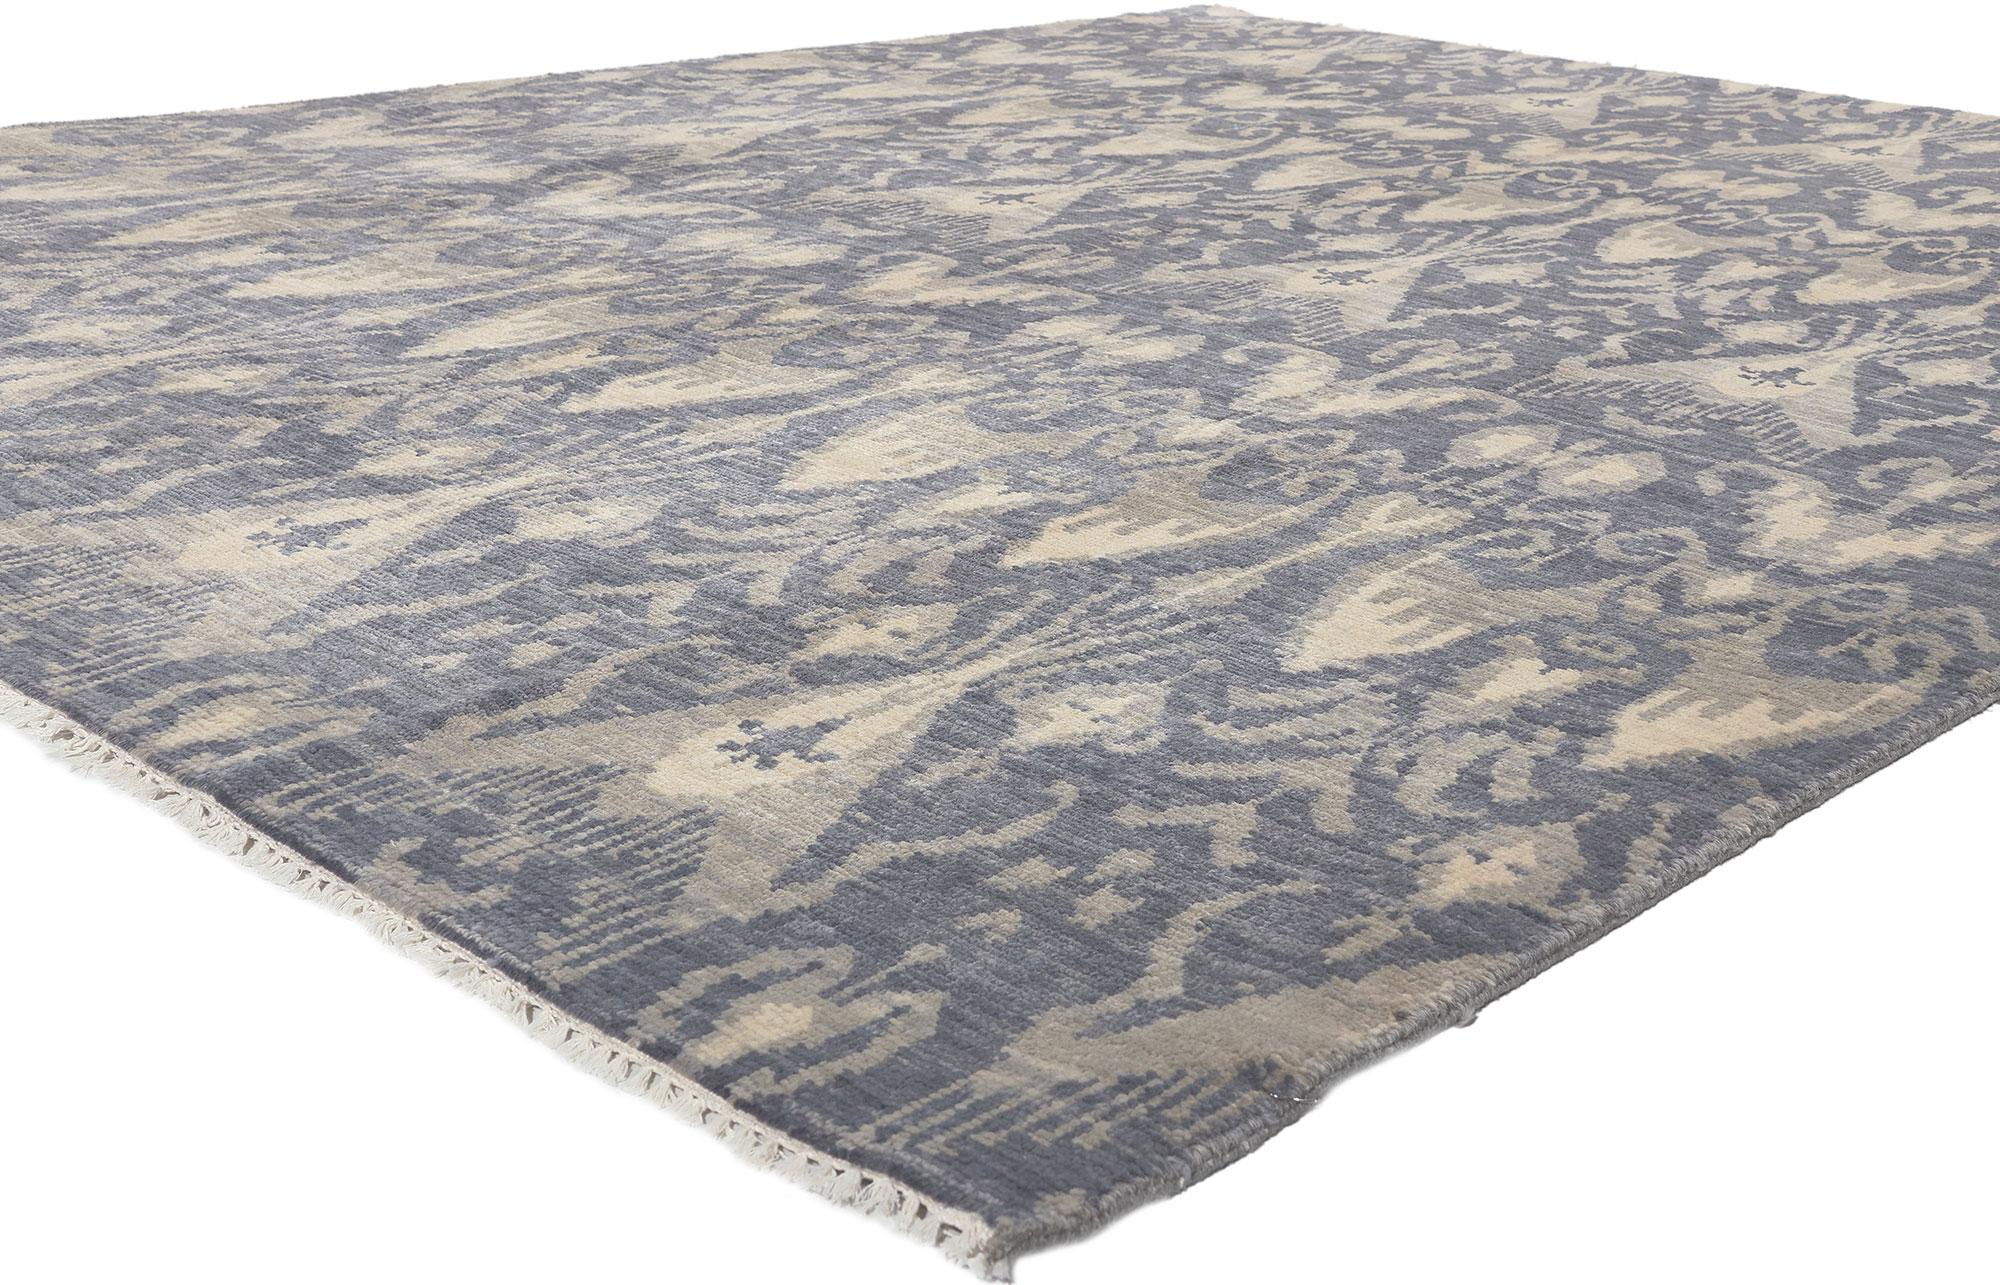 30274 Transitional Ikat Rug, 07'10 x 10'02.
Global chic meets modern boho in this hand knotted wool Ikat rug from India. The eye-catching ikat design and earthy colorway woven into this piece work together creating a classic look with a modern vibe.